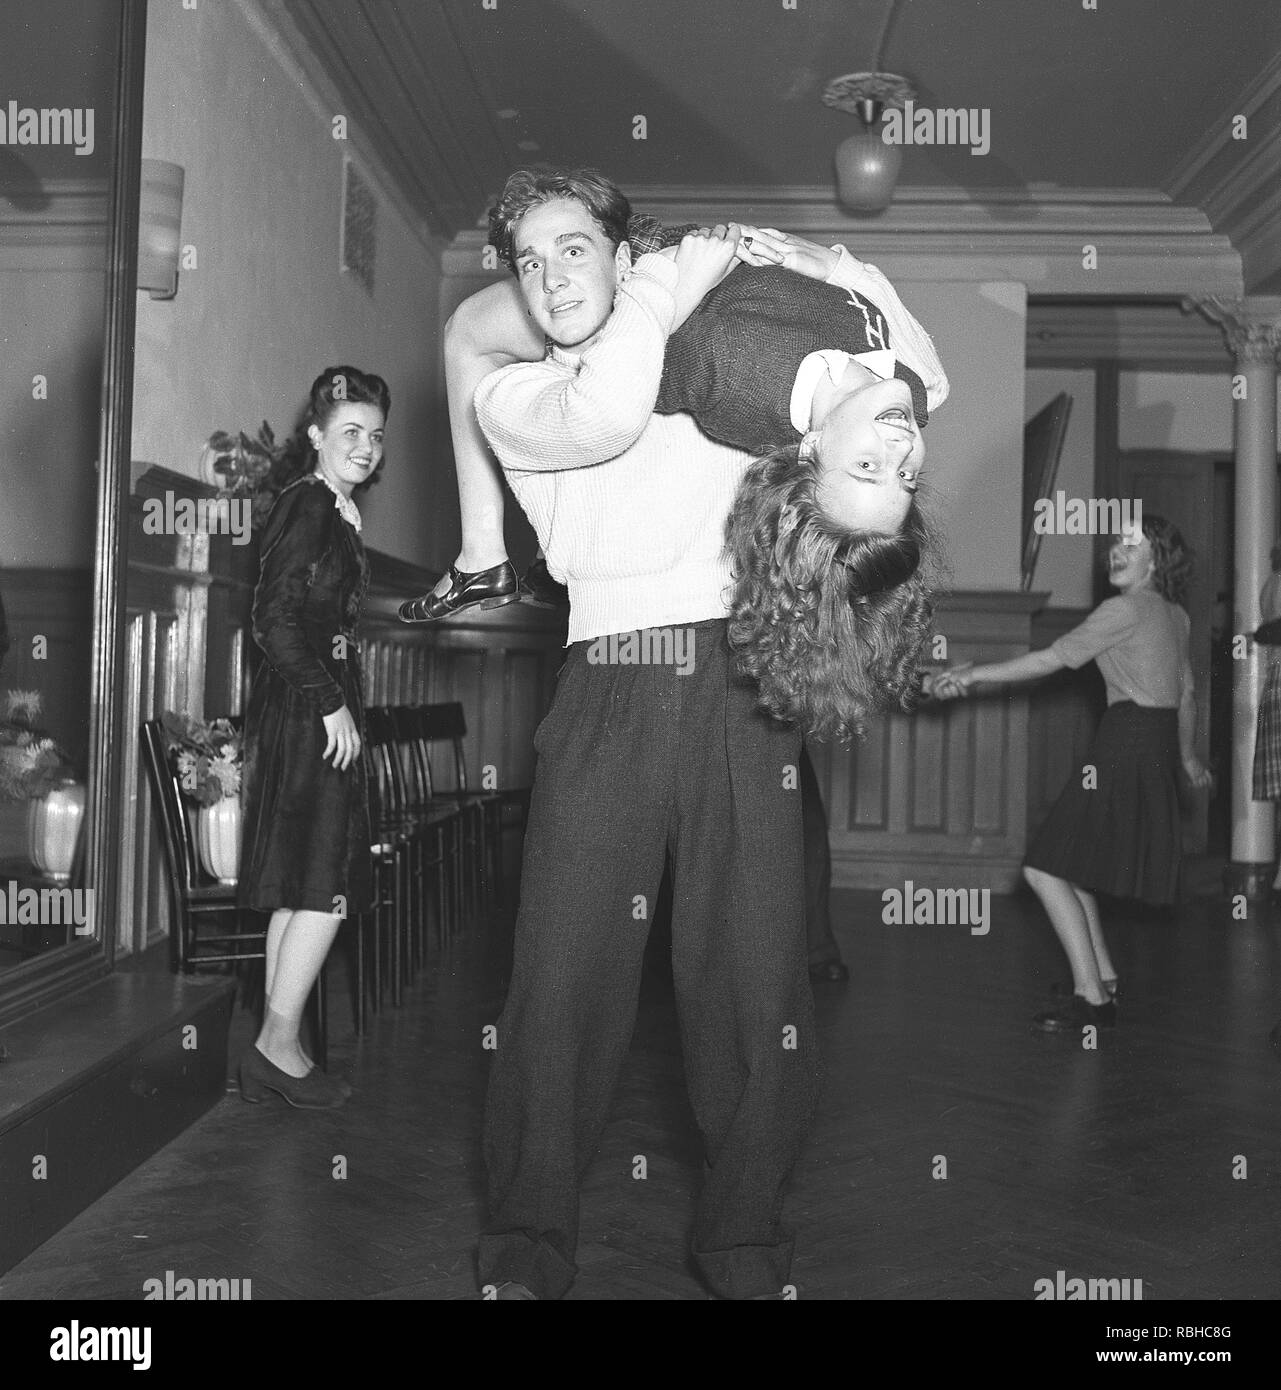 Jitterbug dance. A dance popularized in the United states and spread by American soldiers and sailors around the world during the Second world war. Pictured here a young couple when dancing the Jitterbug dance 1944.  Photo: Kristoffersson ref L2-5 Stock Photo